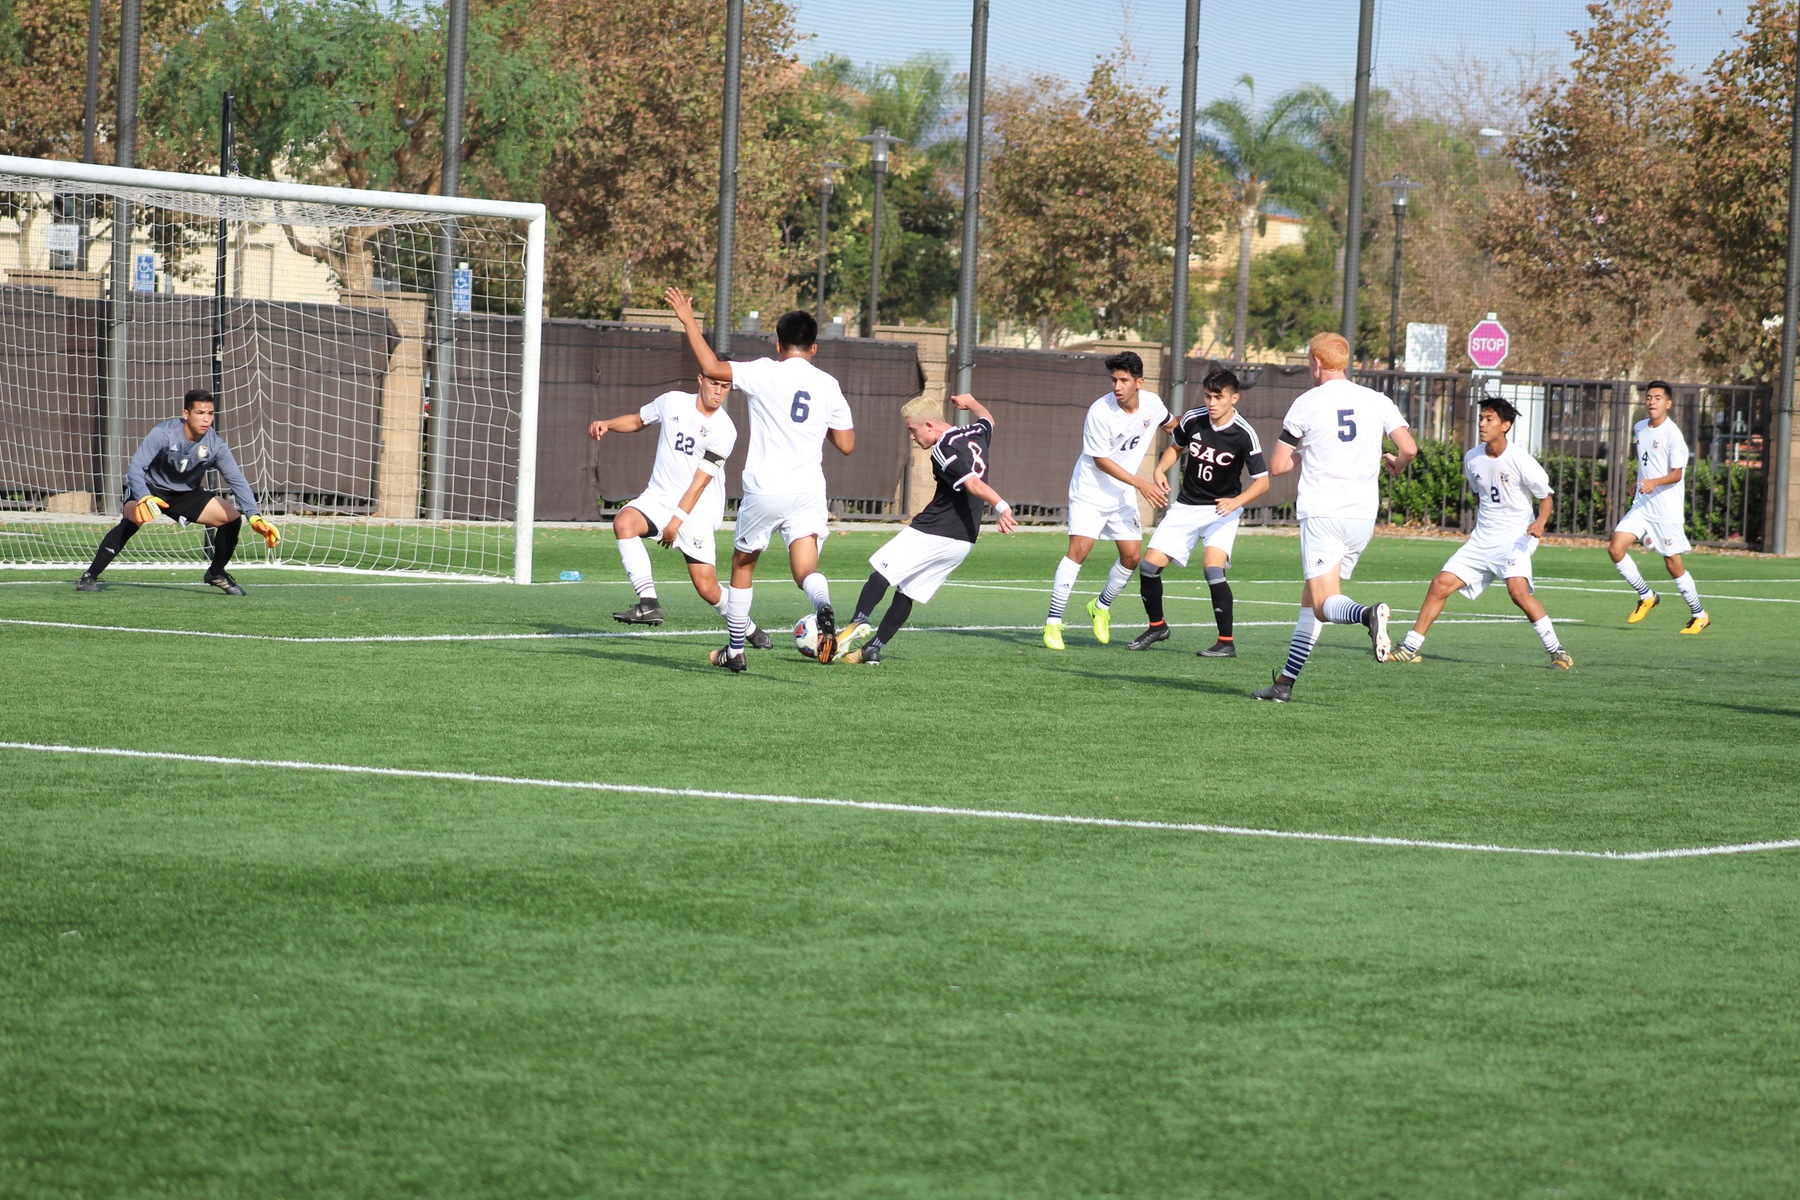 Dons Keep Pace With 2-1 Win Over Fullerton